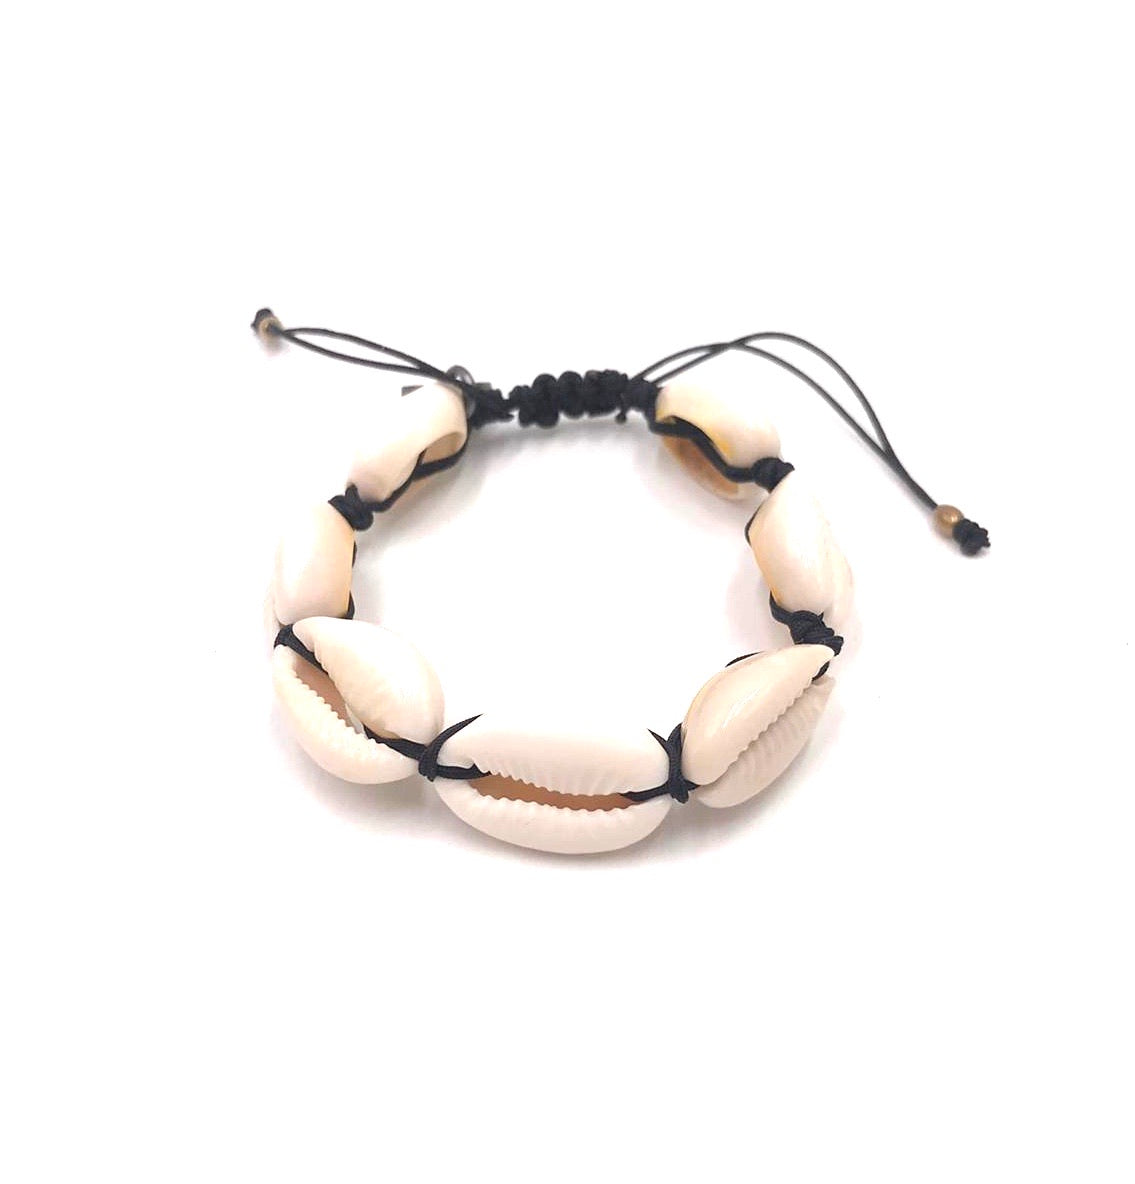 Natural shell bracelet with black cord.